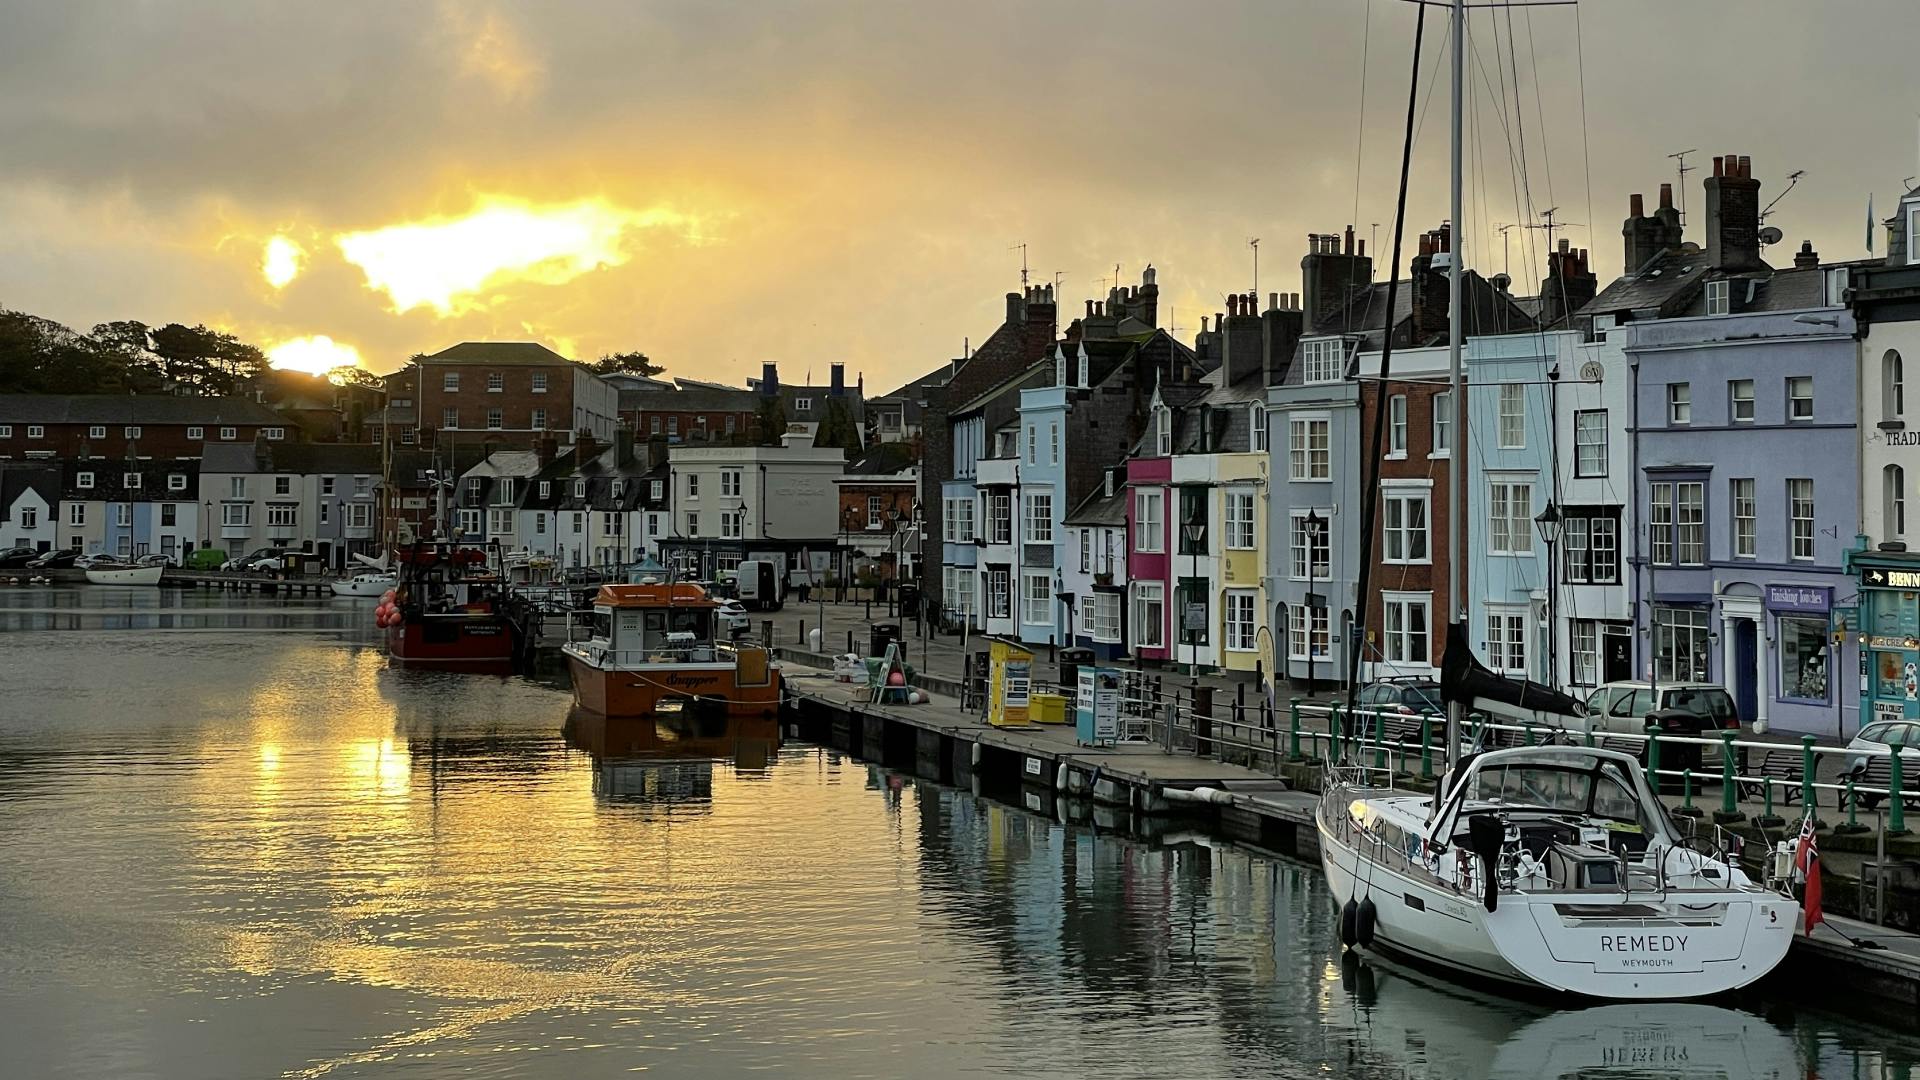 Weymouth - A Great Place to Holiday